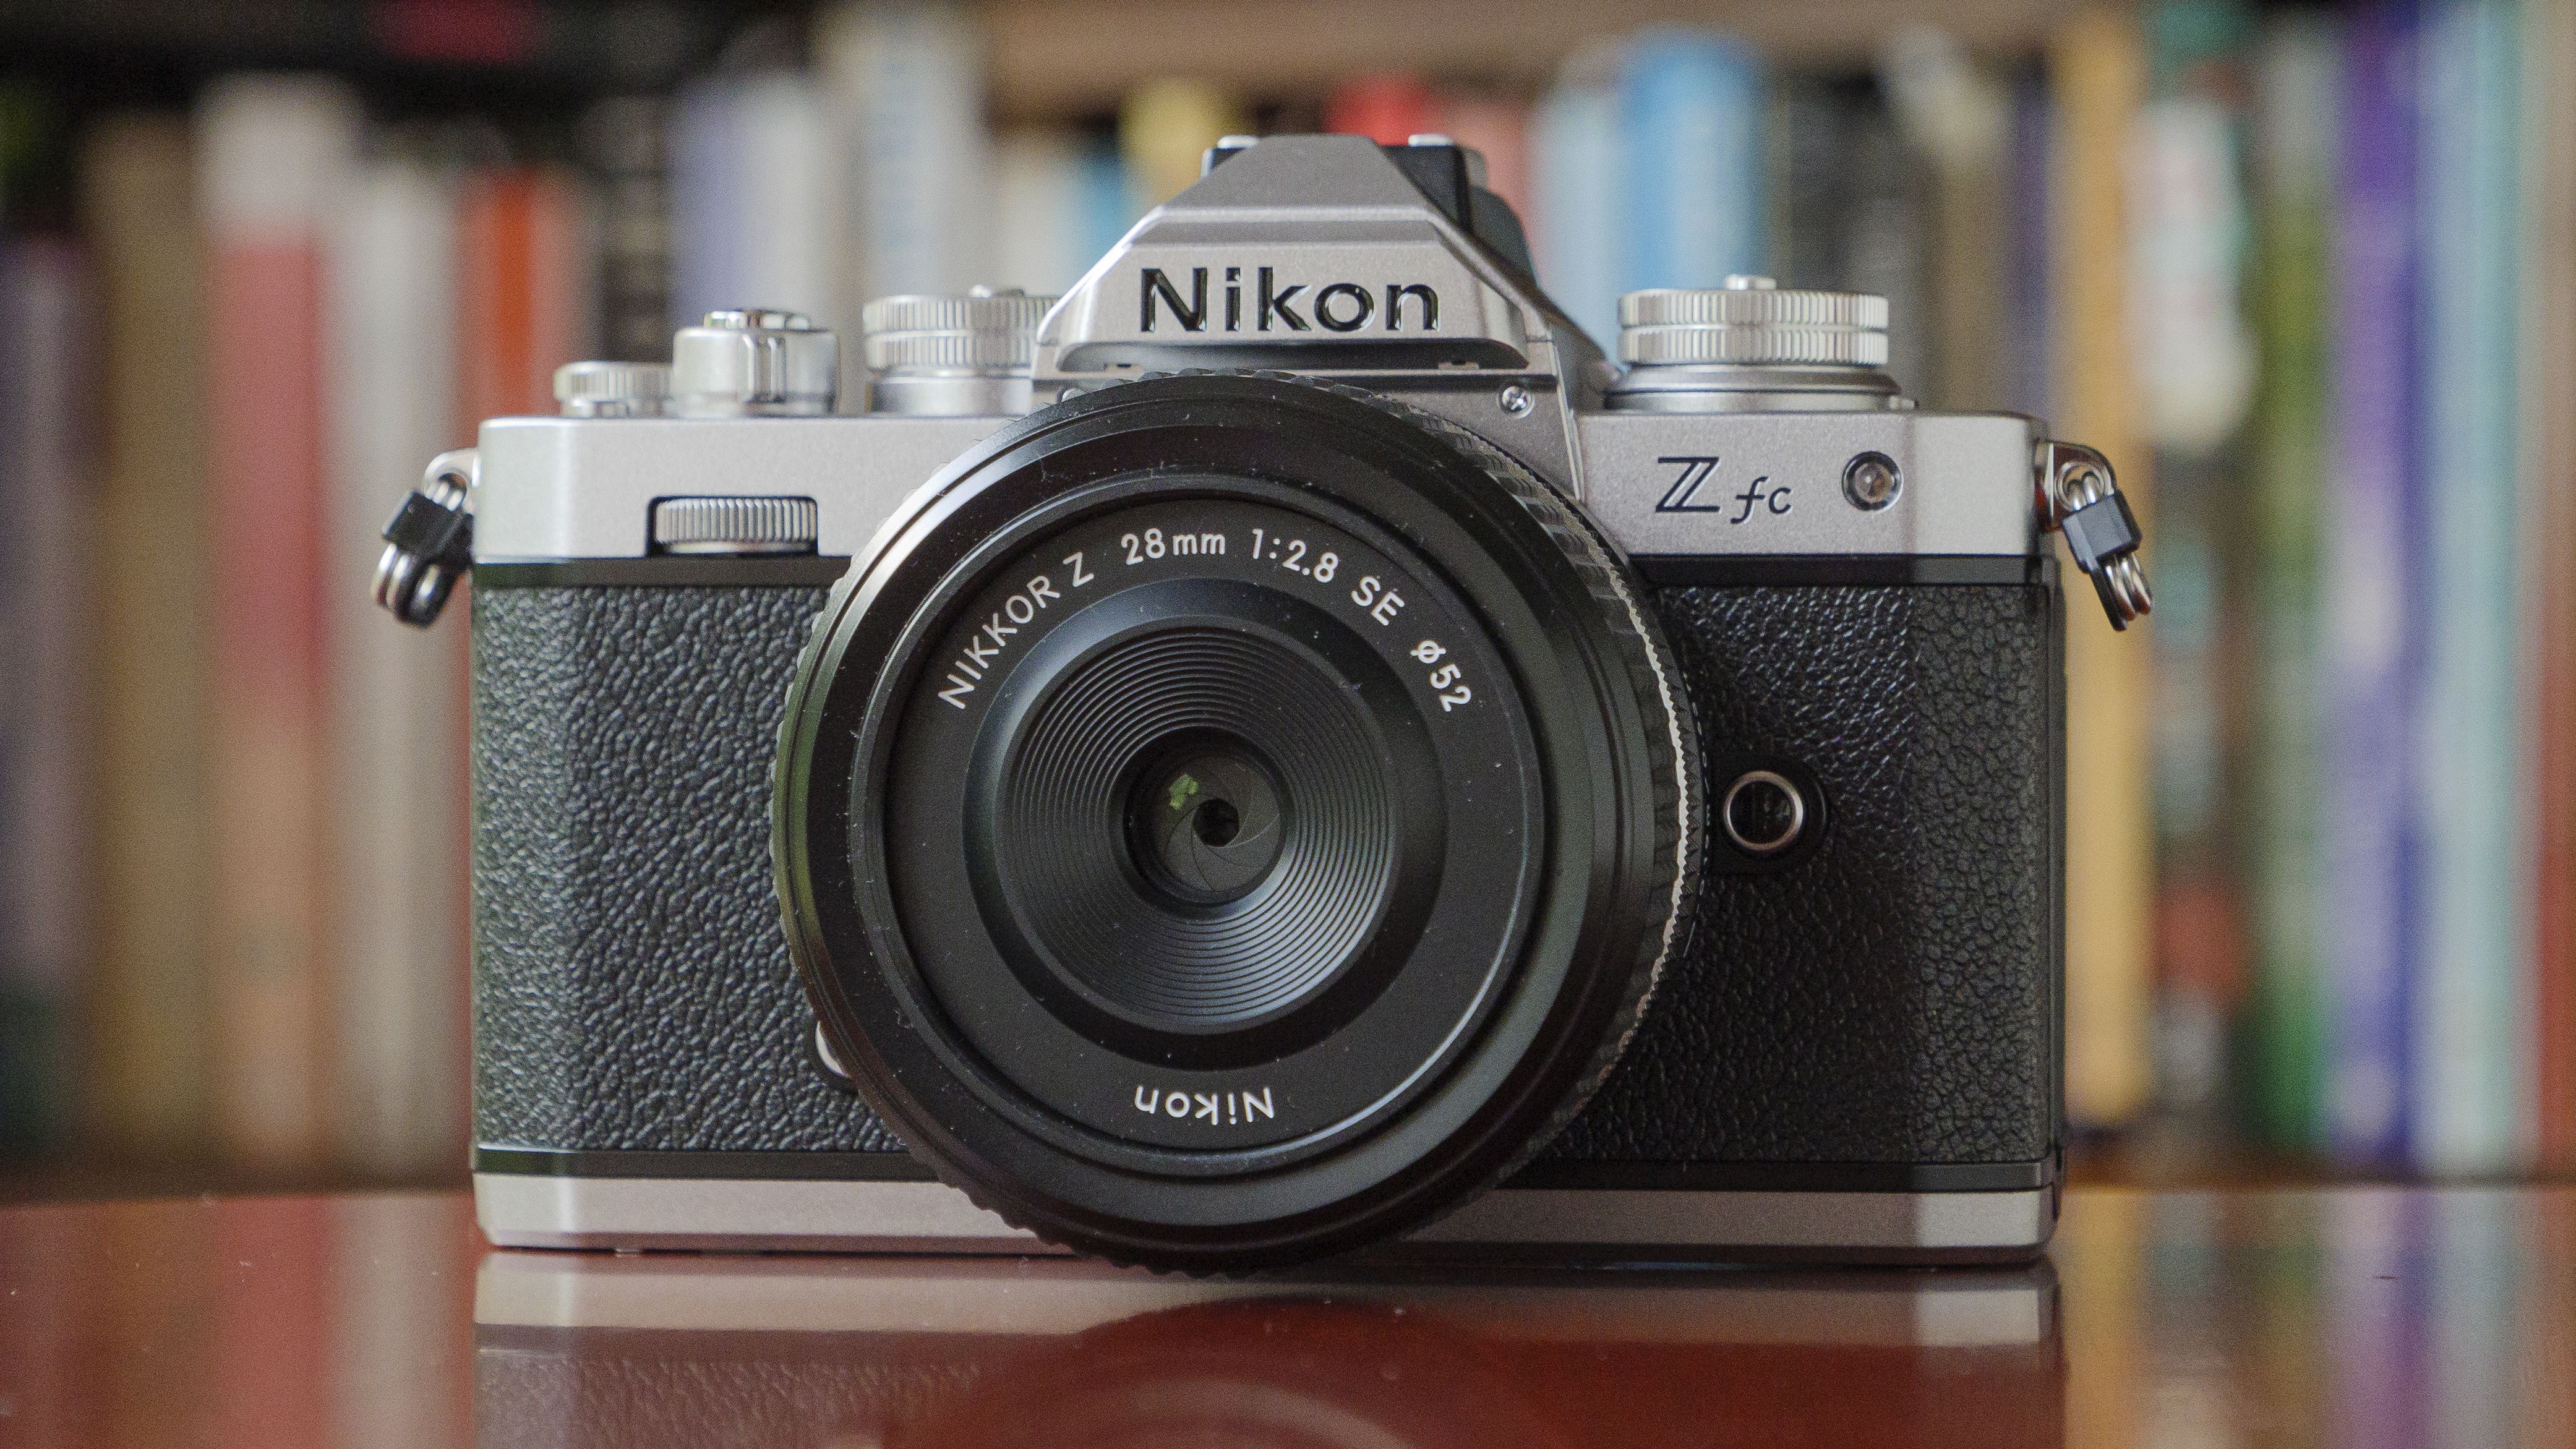 The Nikon Zfc camera sitting on a red table in front of a bookcase